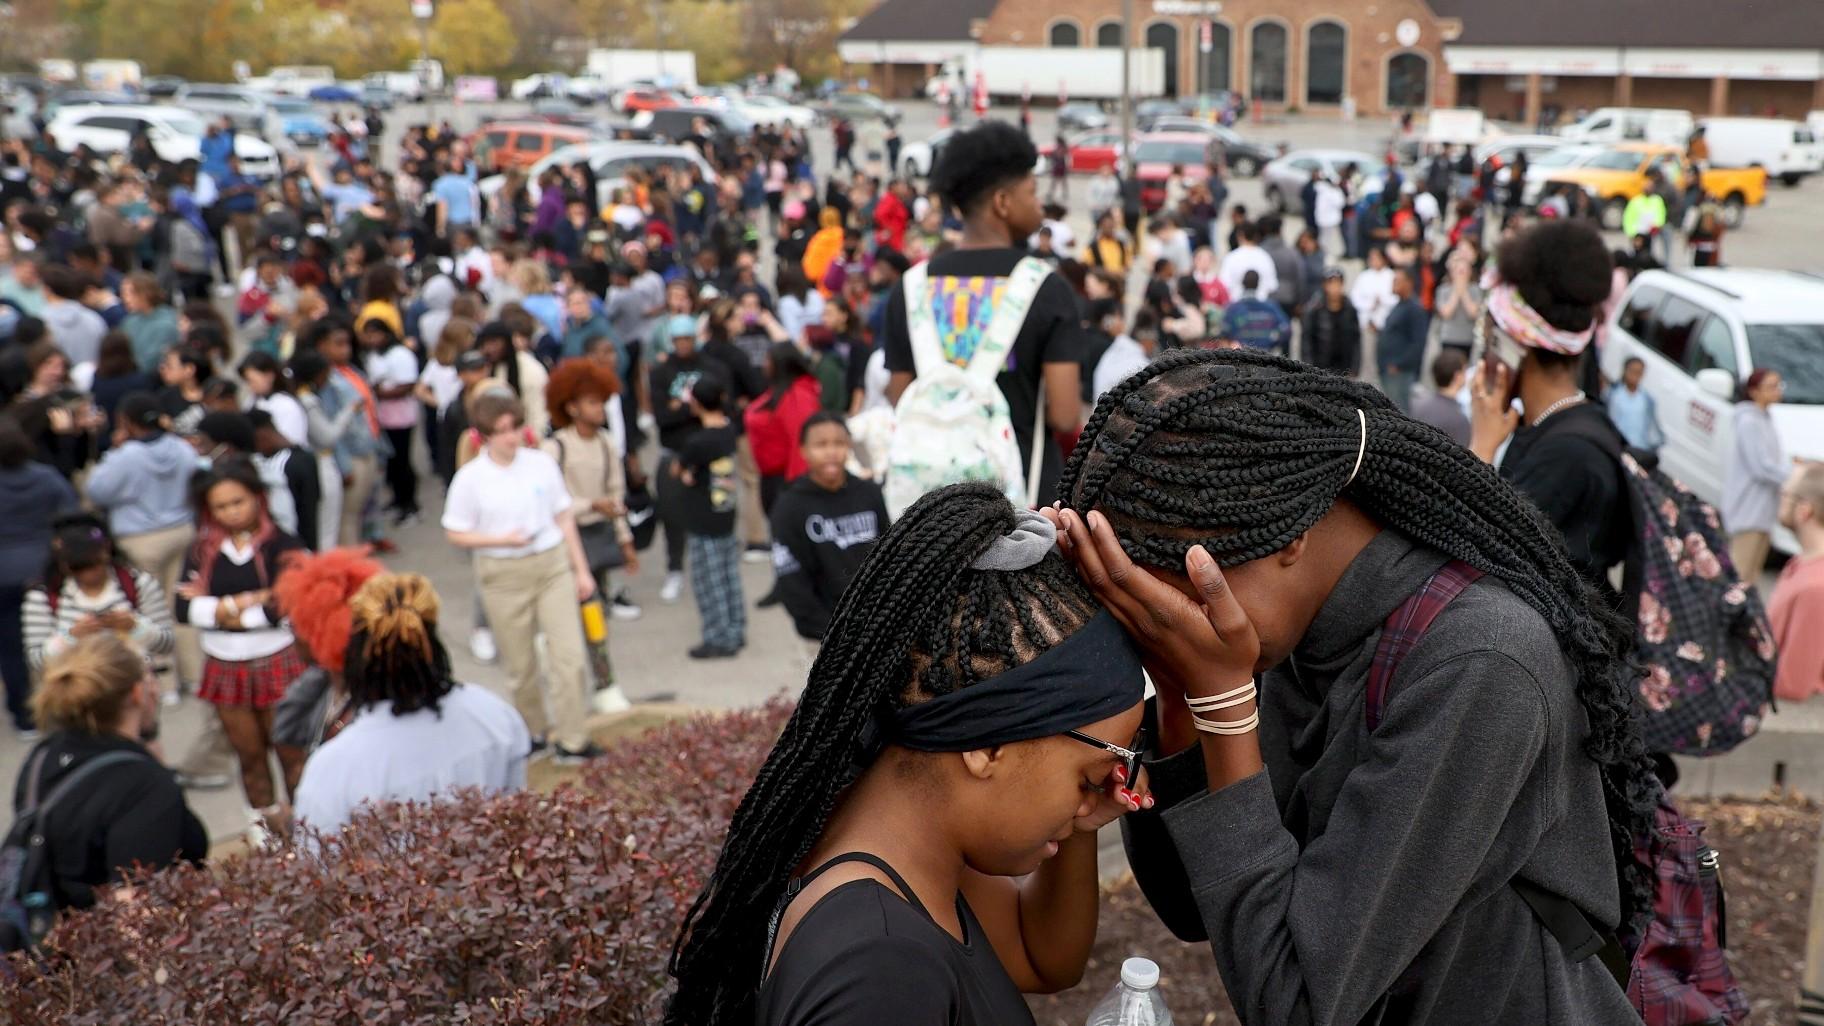 Students stand in a parking lot near the Central Visual & Performing Arts High School after a reported shooting at the school in St. Louis on Monday, Oct. 24, 2022. (David Carson / St. Louis Post-Dispatch via AP)